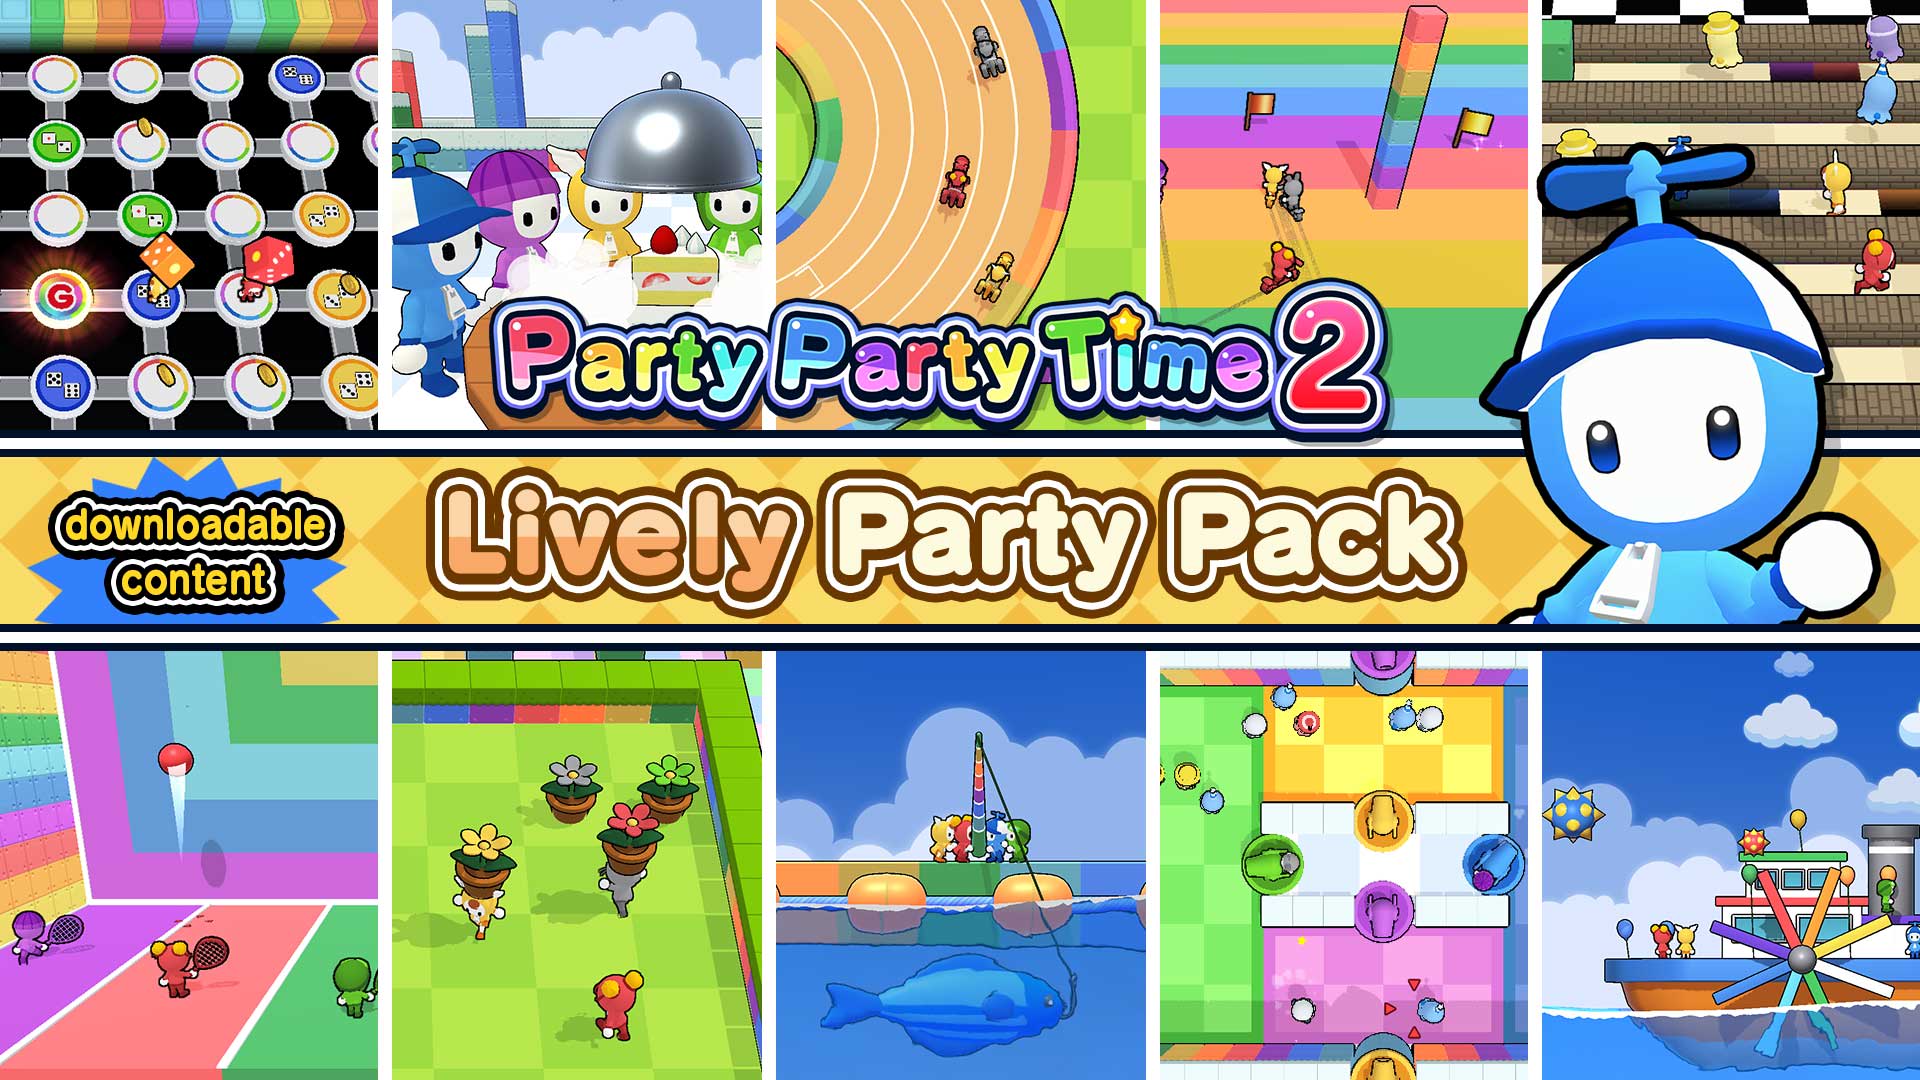 Lively Party Pack